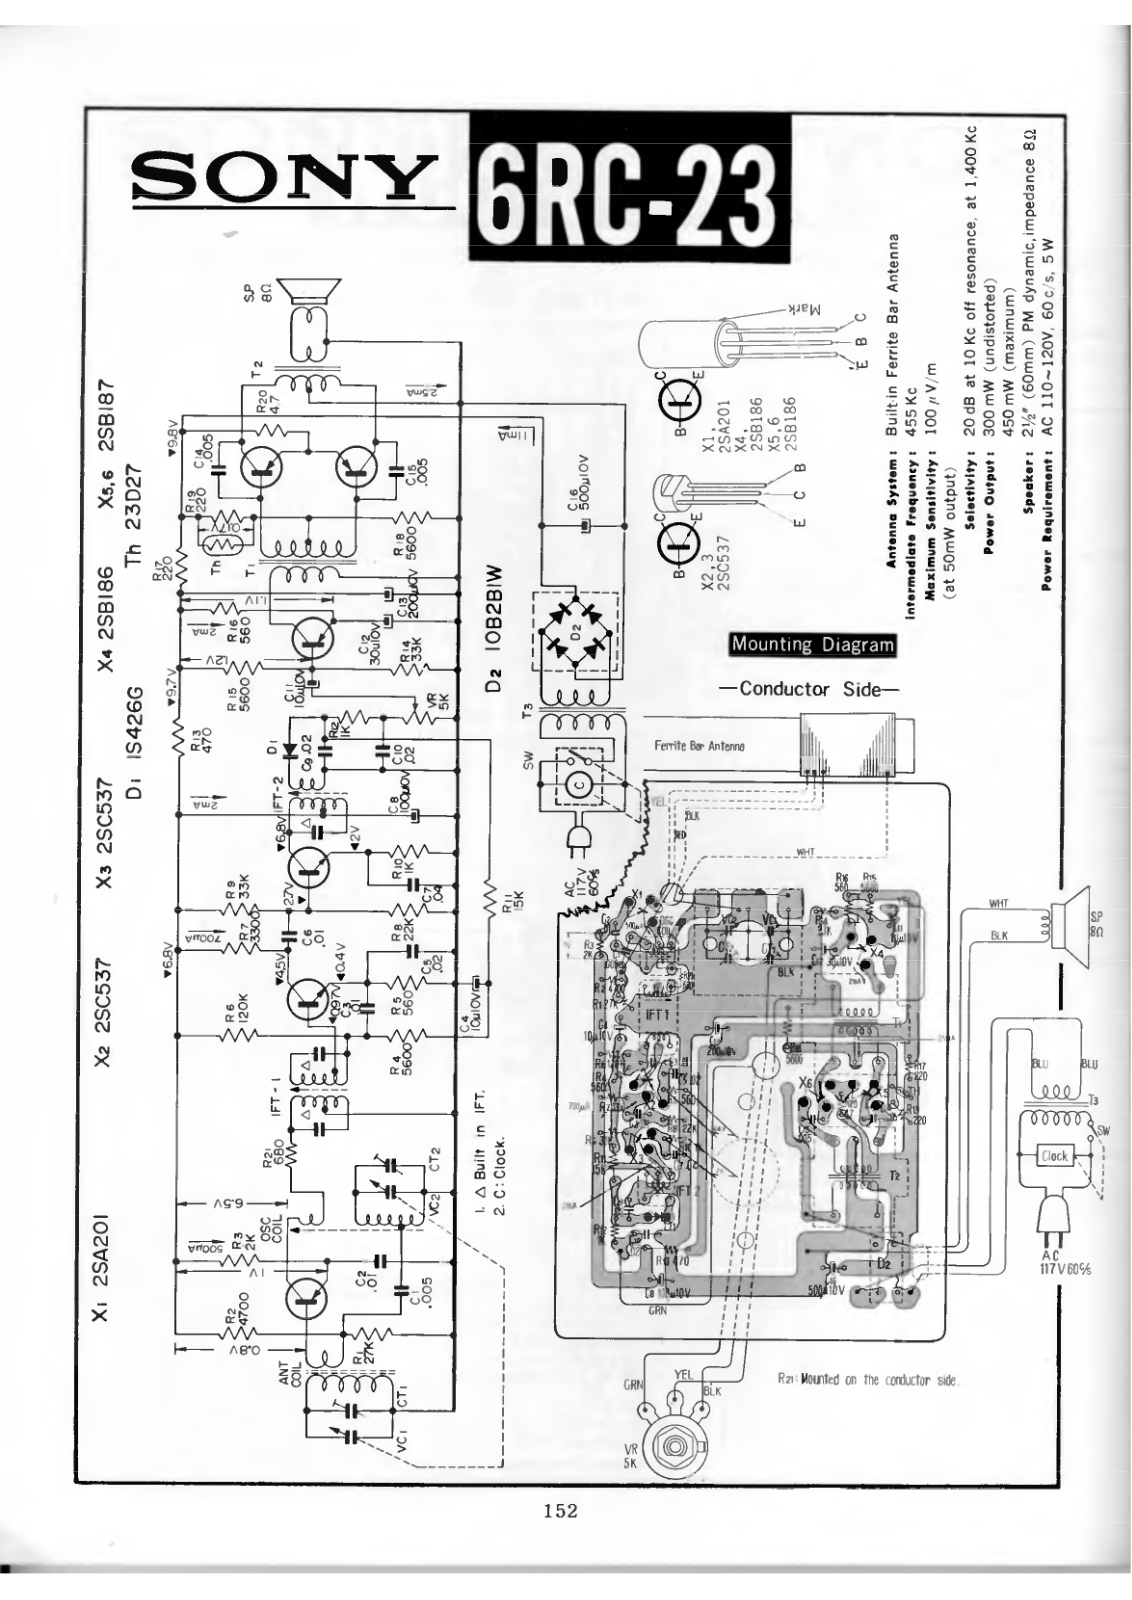 Sony 6RC-23 Schematic